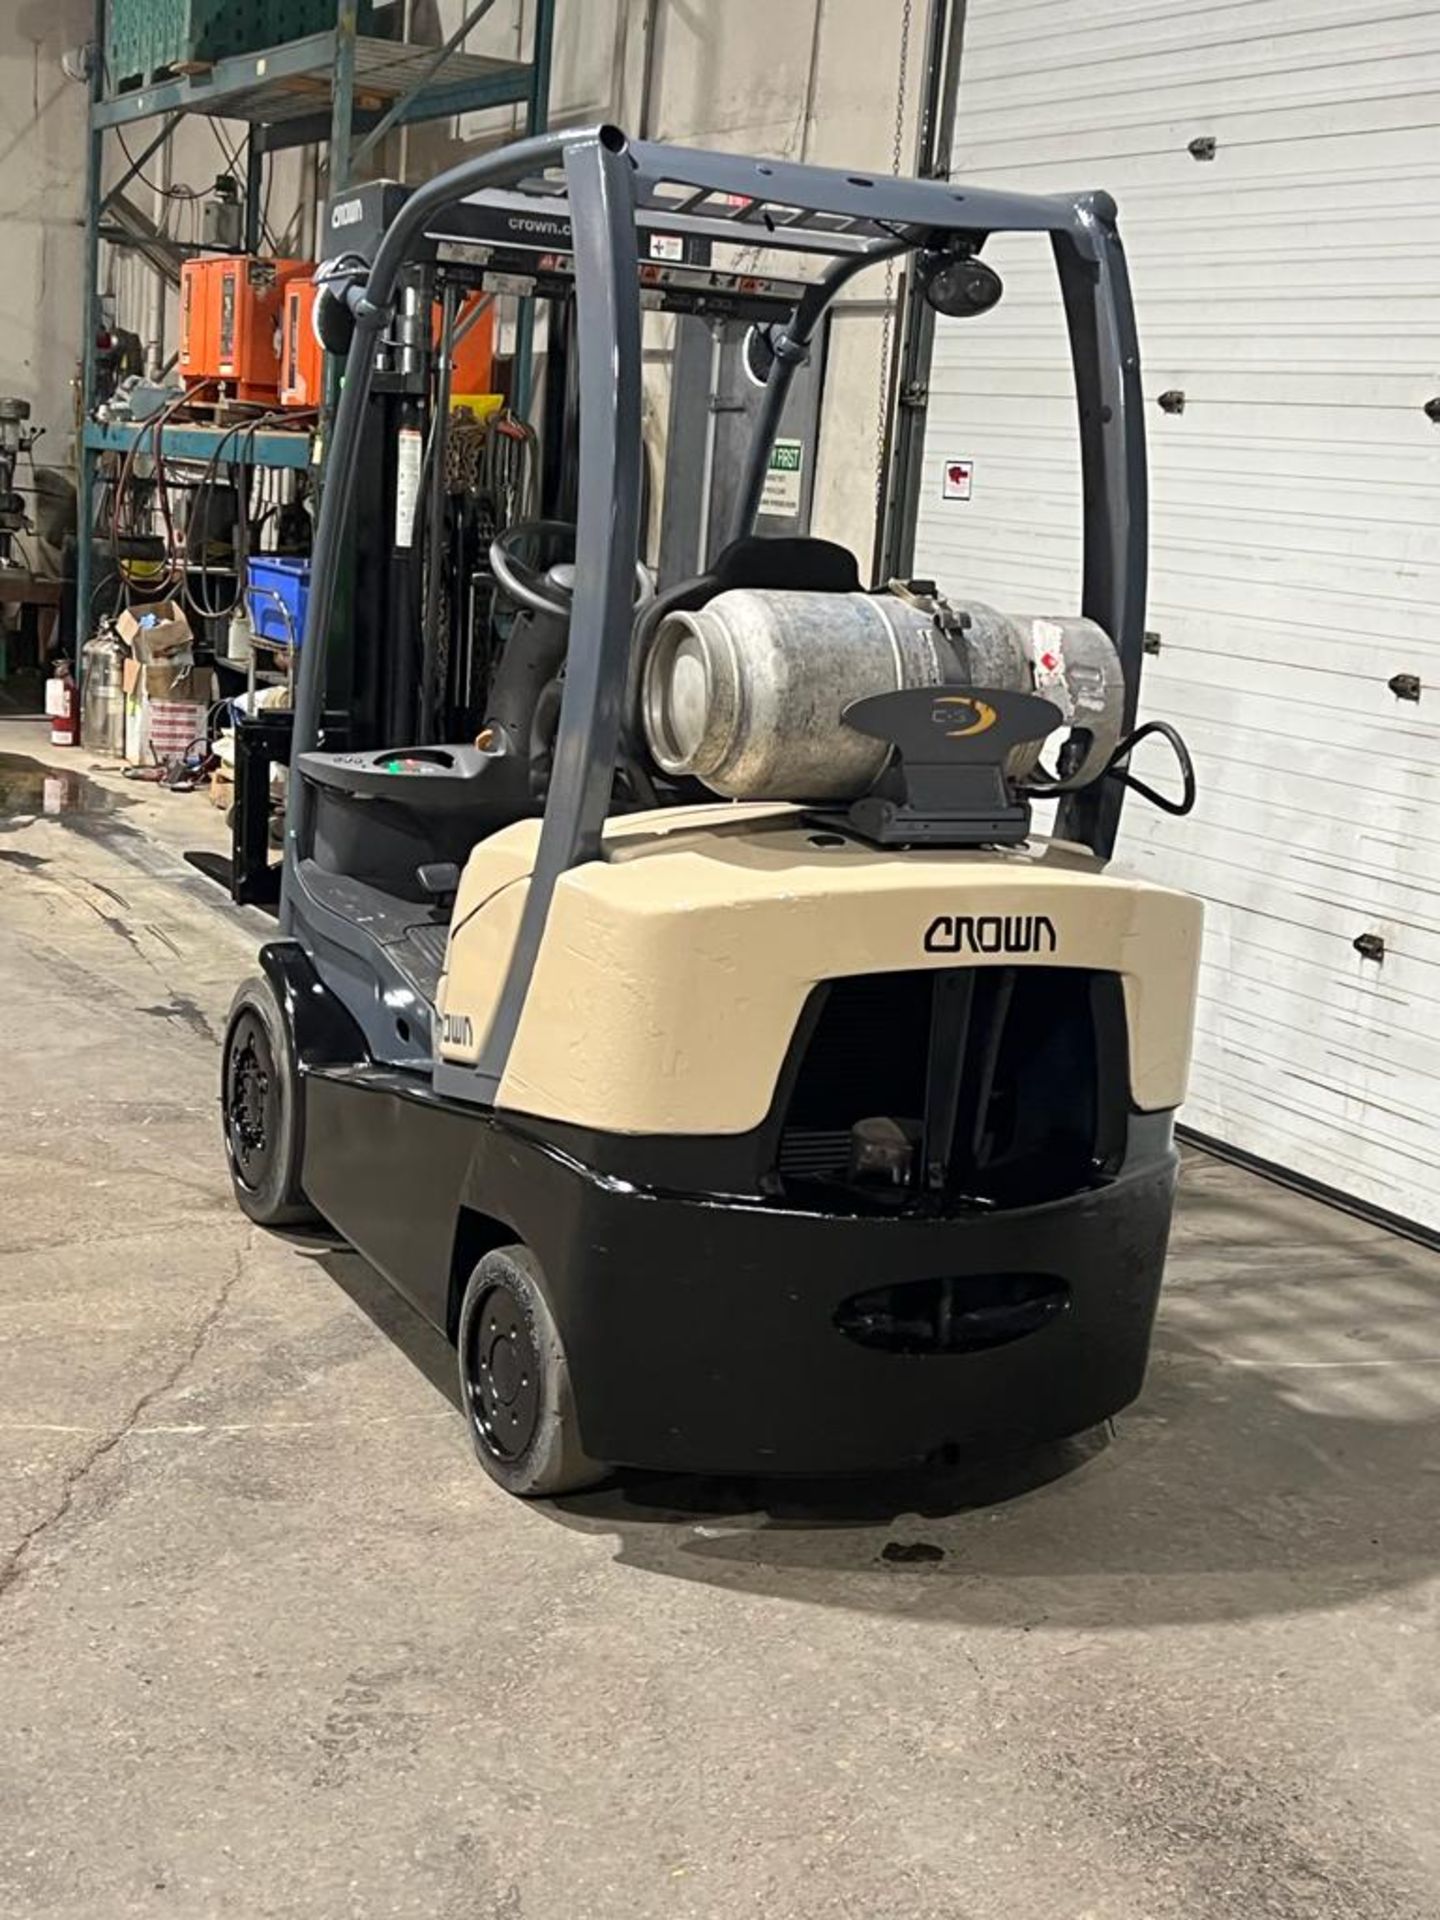 2016 Crown 5,000lbs Capacity Forklift LPG (propane) with 3-STAGE MAST with Sideshift (no propane - Image 3 of 4